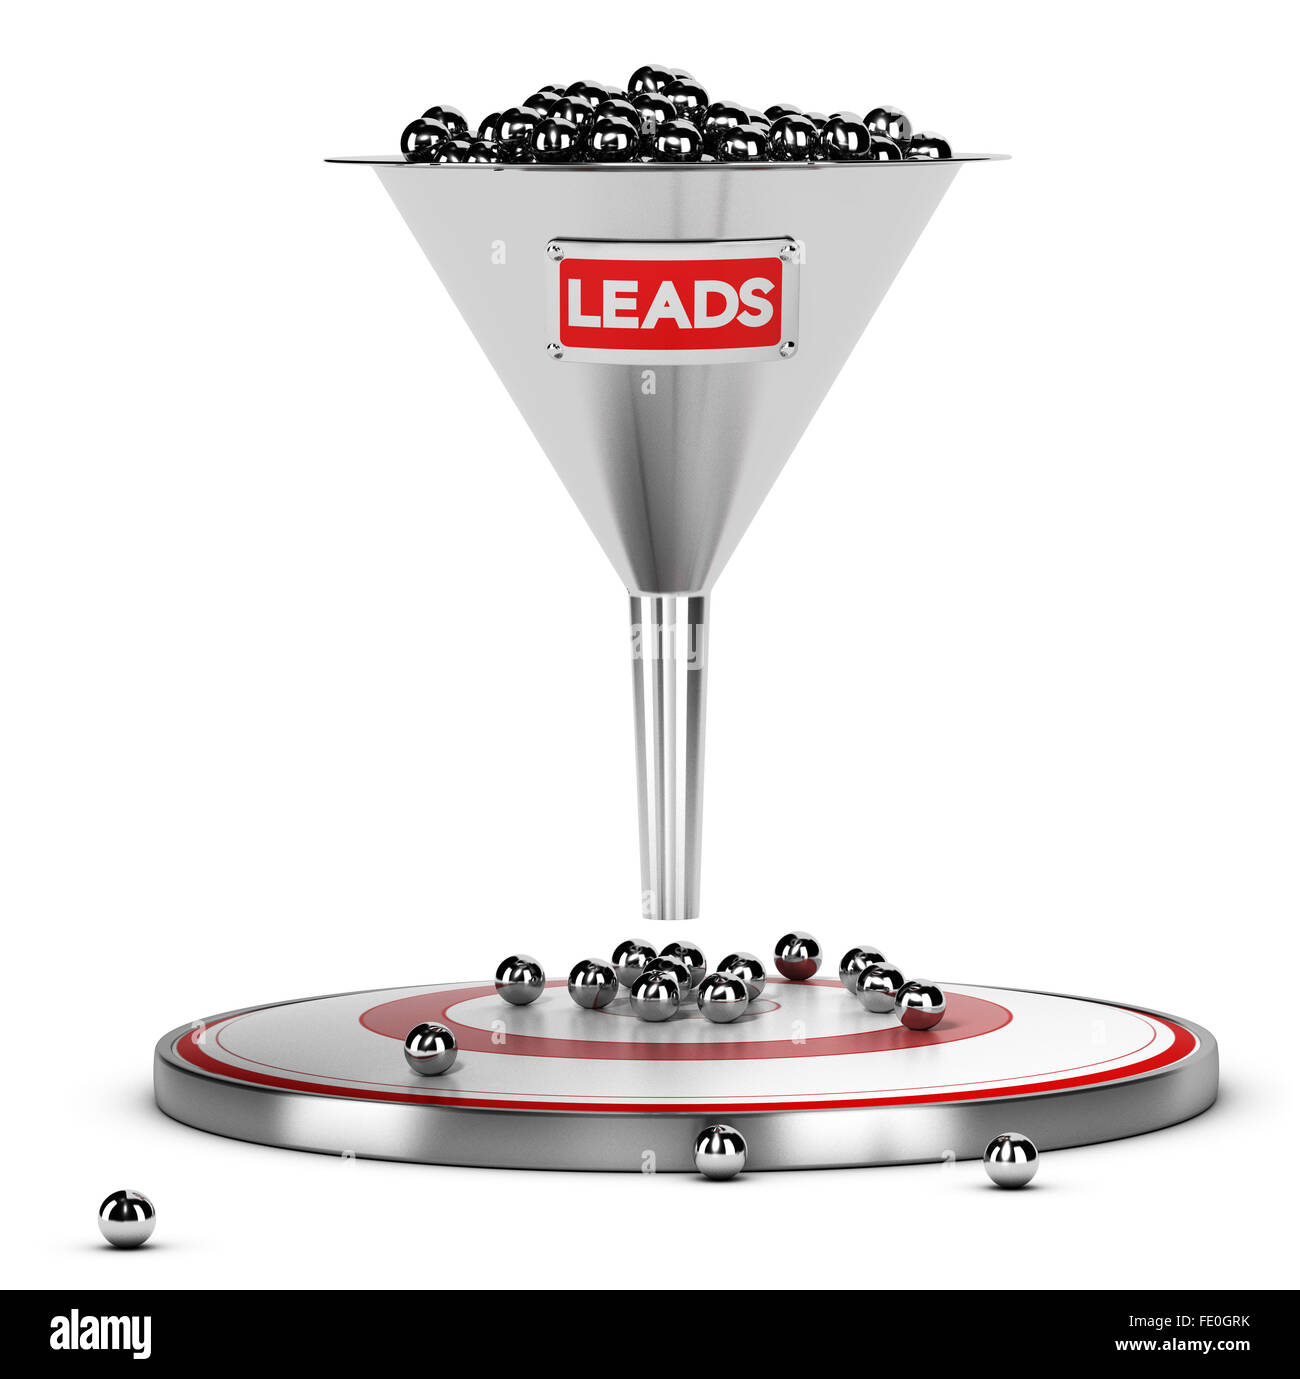 funnel with many metallic spheres and one target over white background. Illustration concept of sales lead nurturing Stock Photo